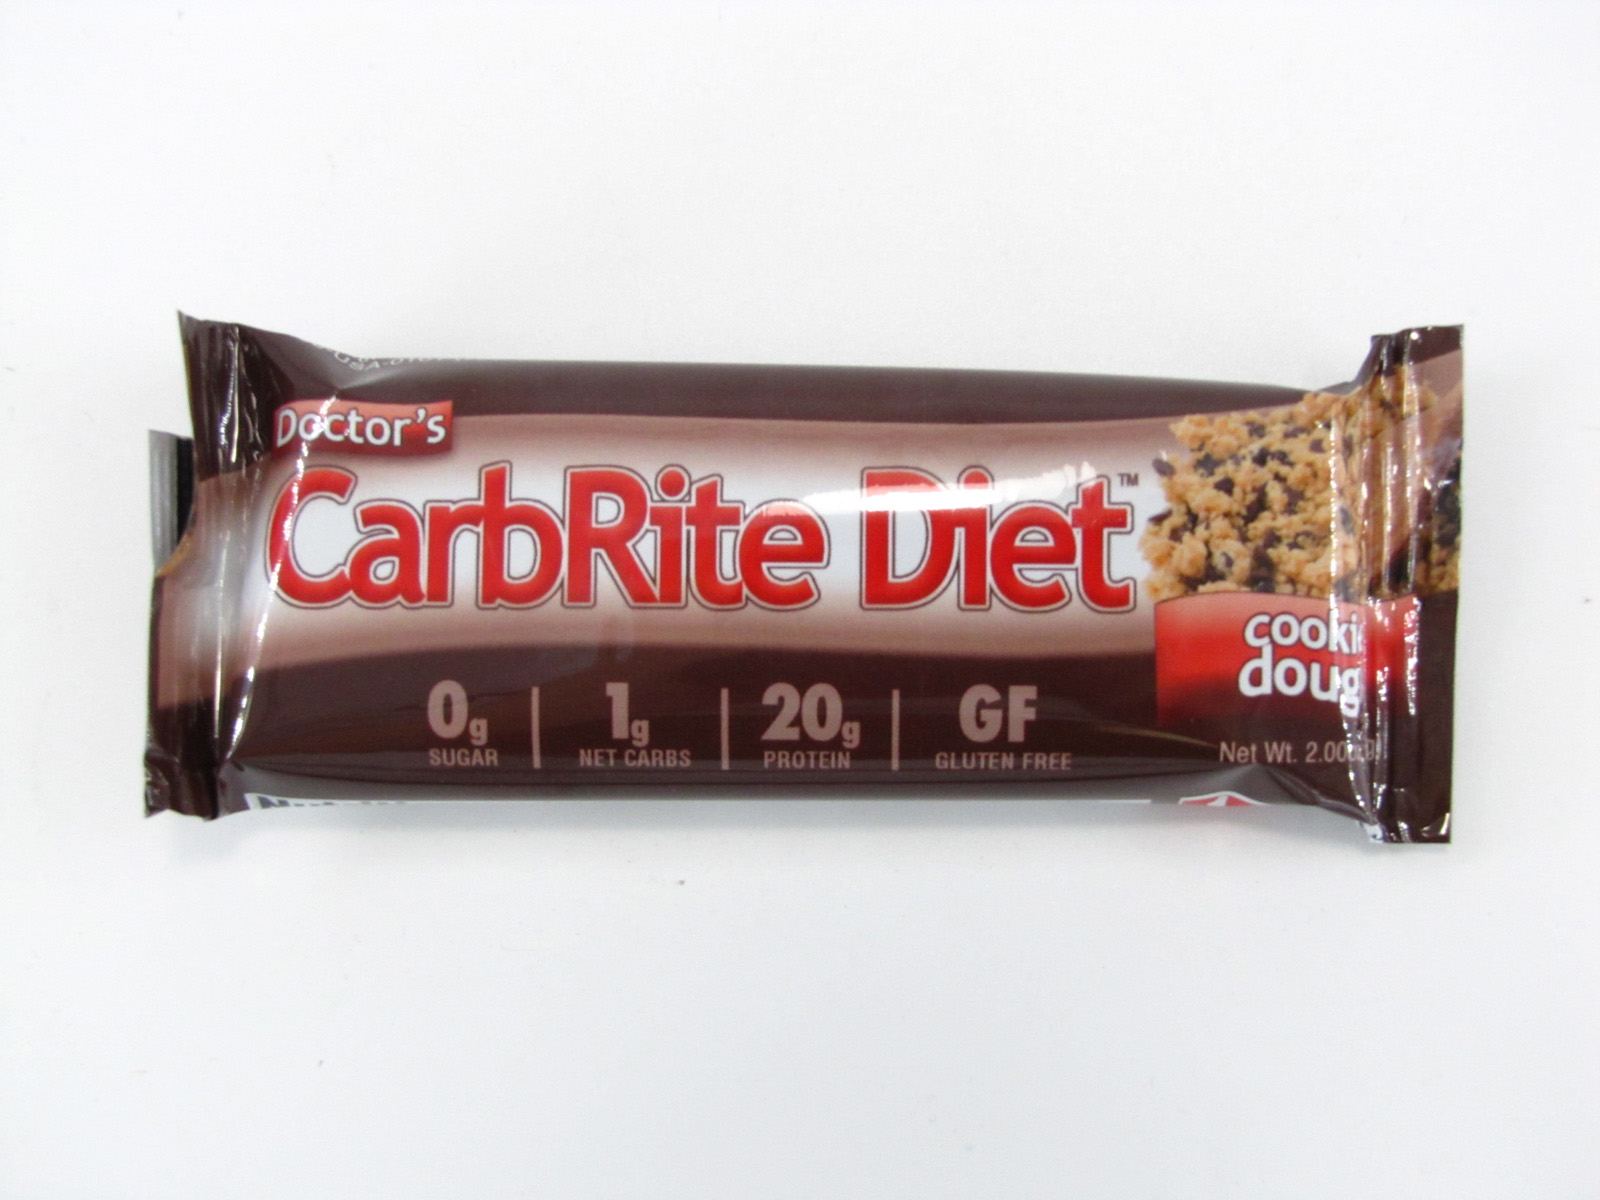 Doctor's CarbRite Diet - Cookie Dough - front view